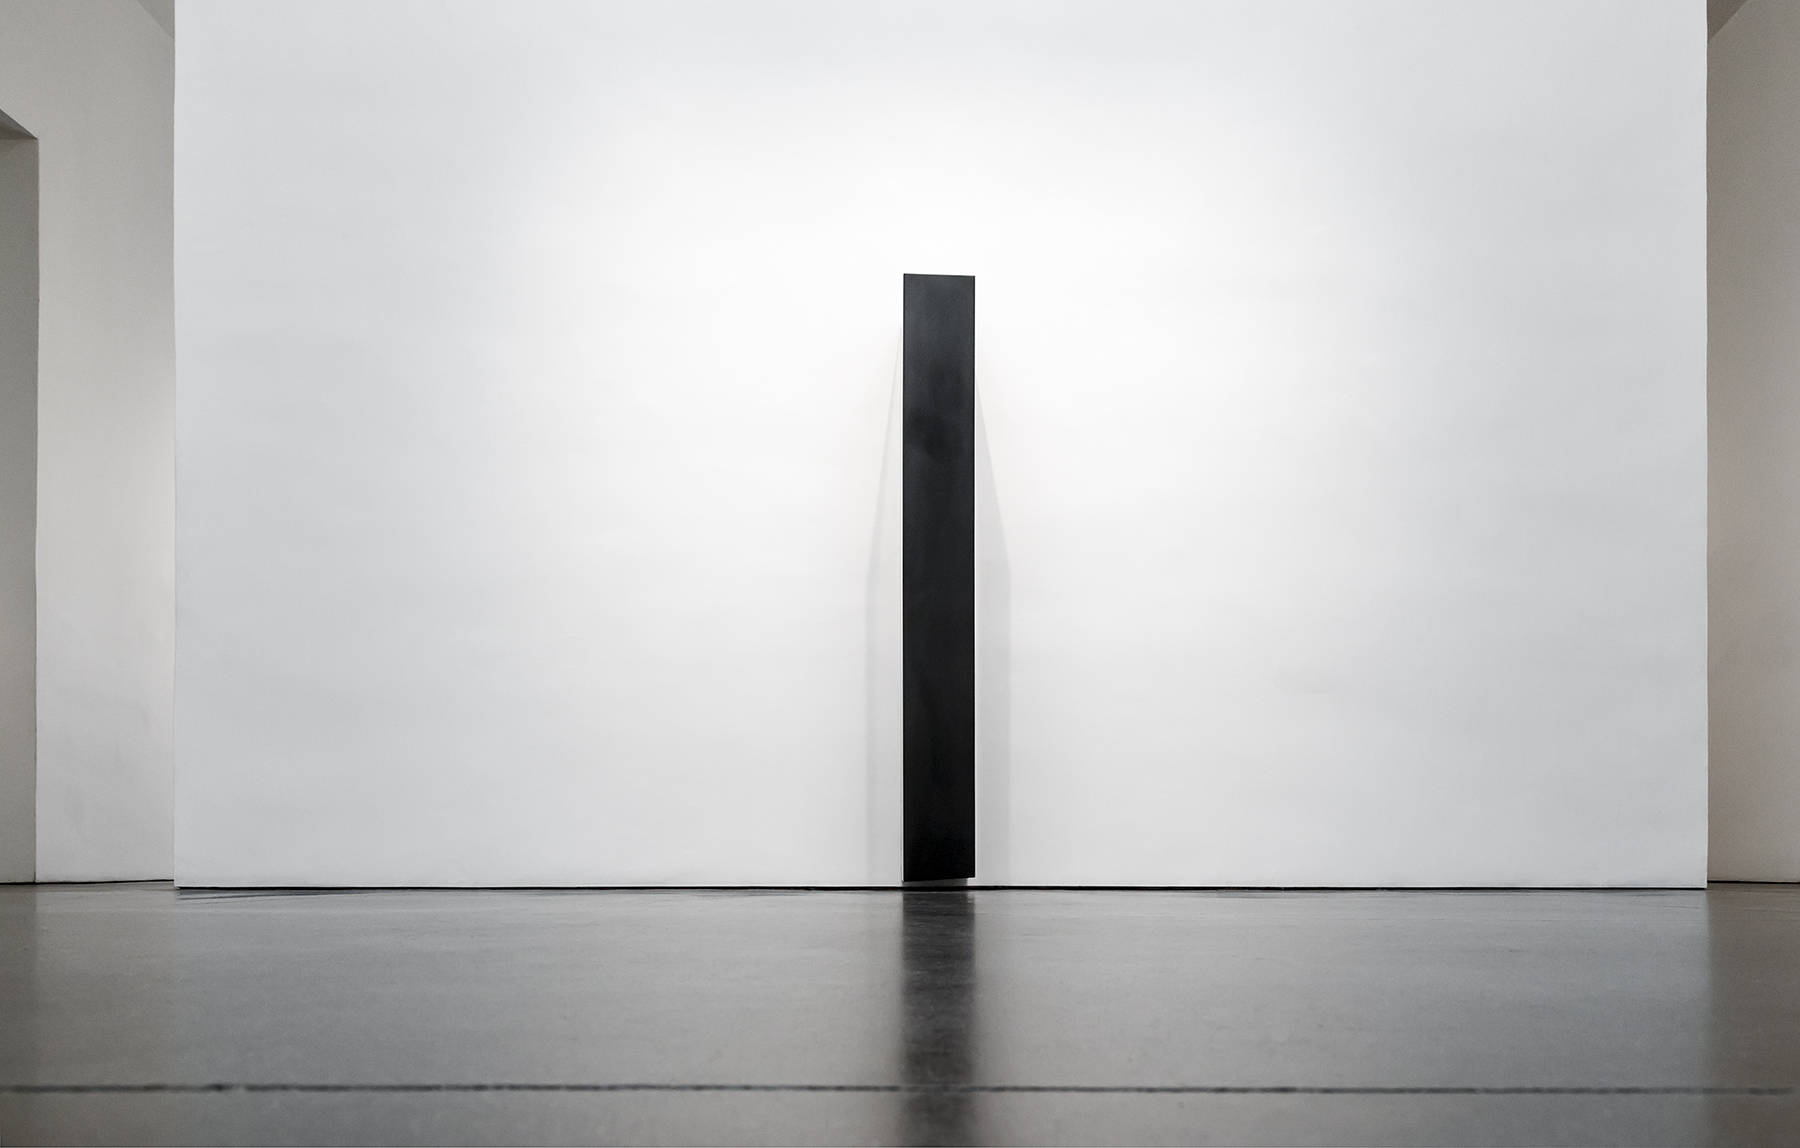   Tilted Column, 2008  Solid graphite,&nbsp;70” x 14” x 15”   Carbon: Susan York (installation view, Georgia O'Keeffe Museum, 2016) Photo: Larry Fodor 